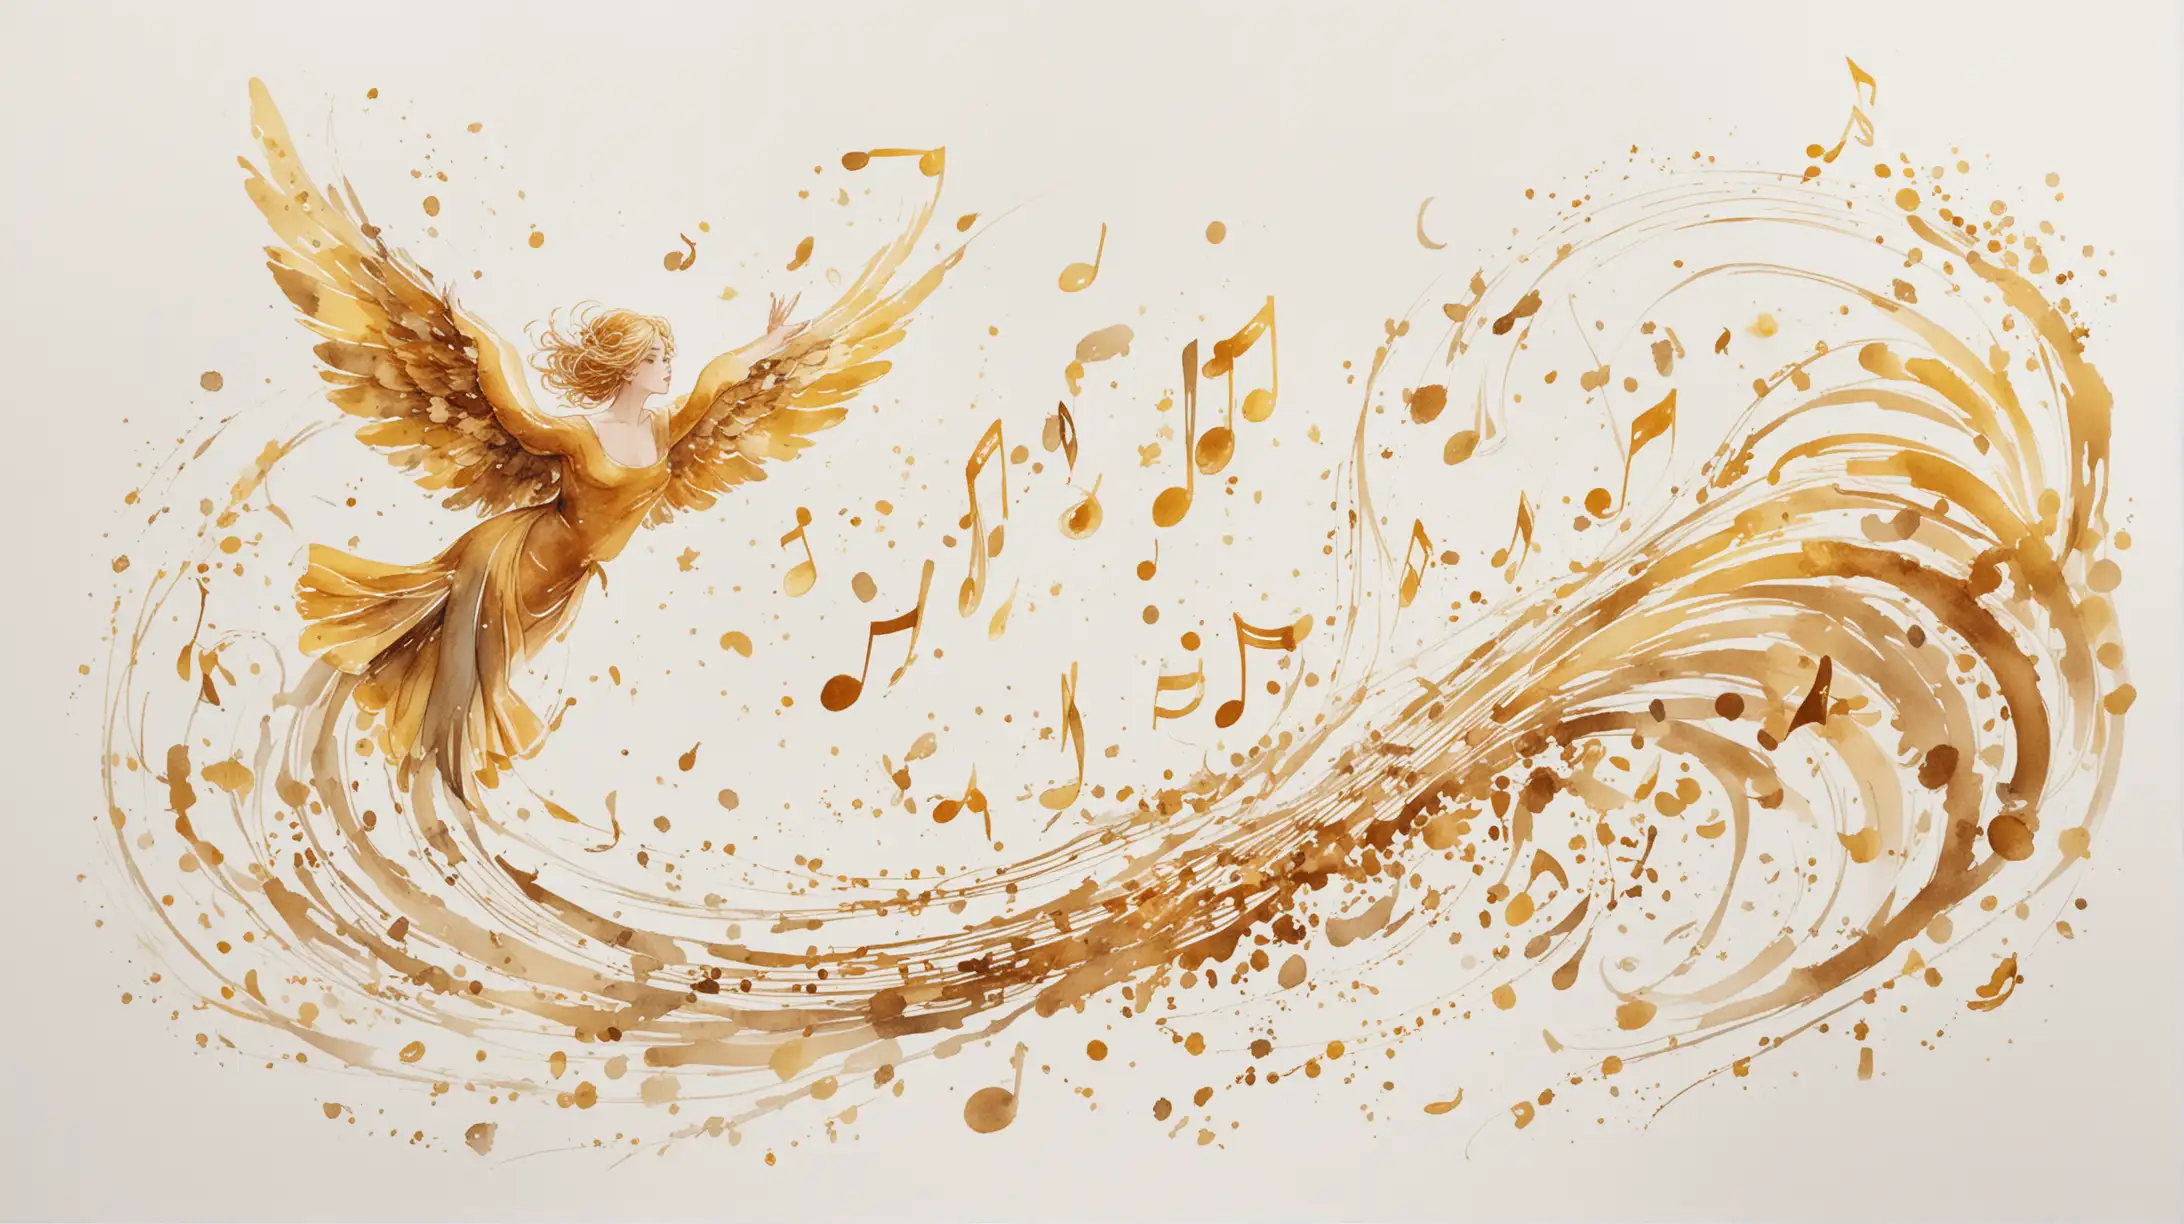 Whimsical Anime Style Watercolor Painting of Golden Musical Notes in Flight